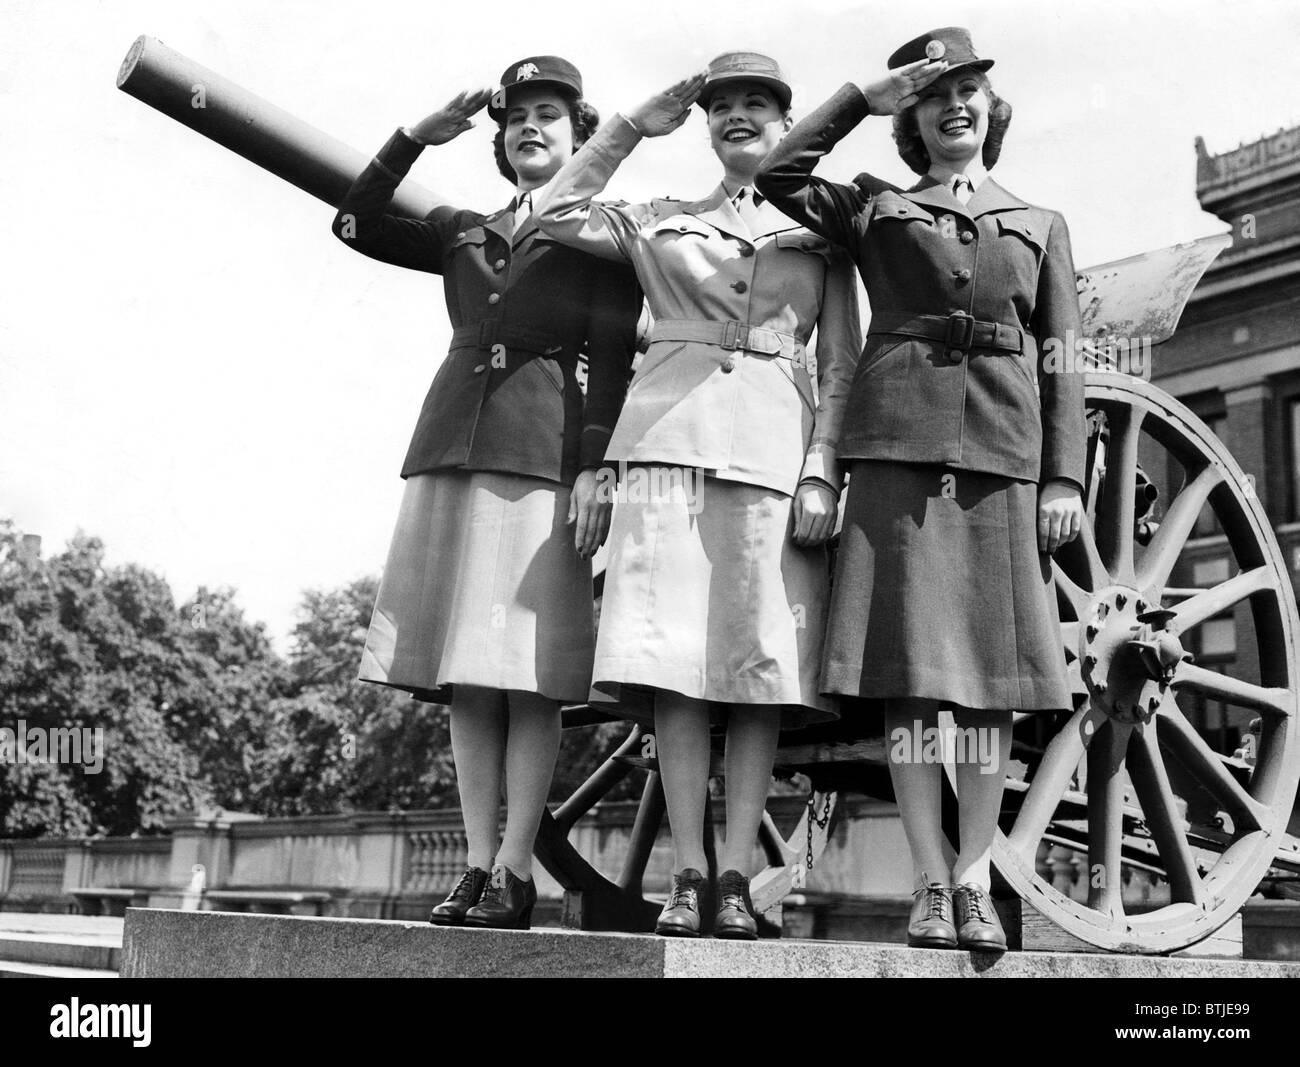 Gloria Pickett, Jane Greer (then Bette Jane Greer), and Inga Rundvold, modeling the uniforms to be worn by the Women's Auxiliary Stock Photo